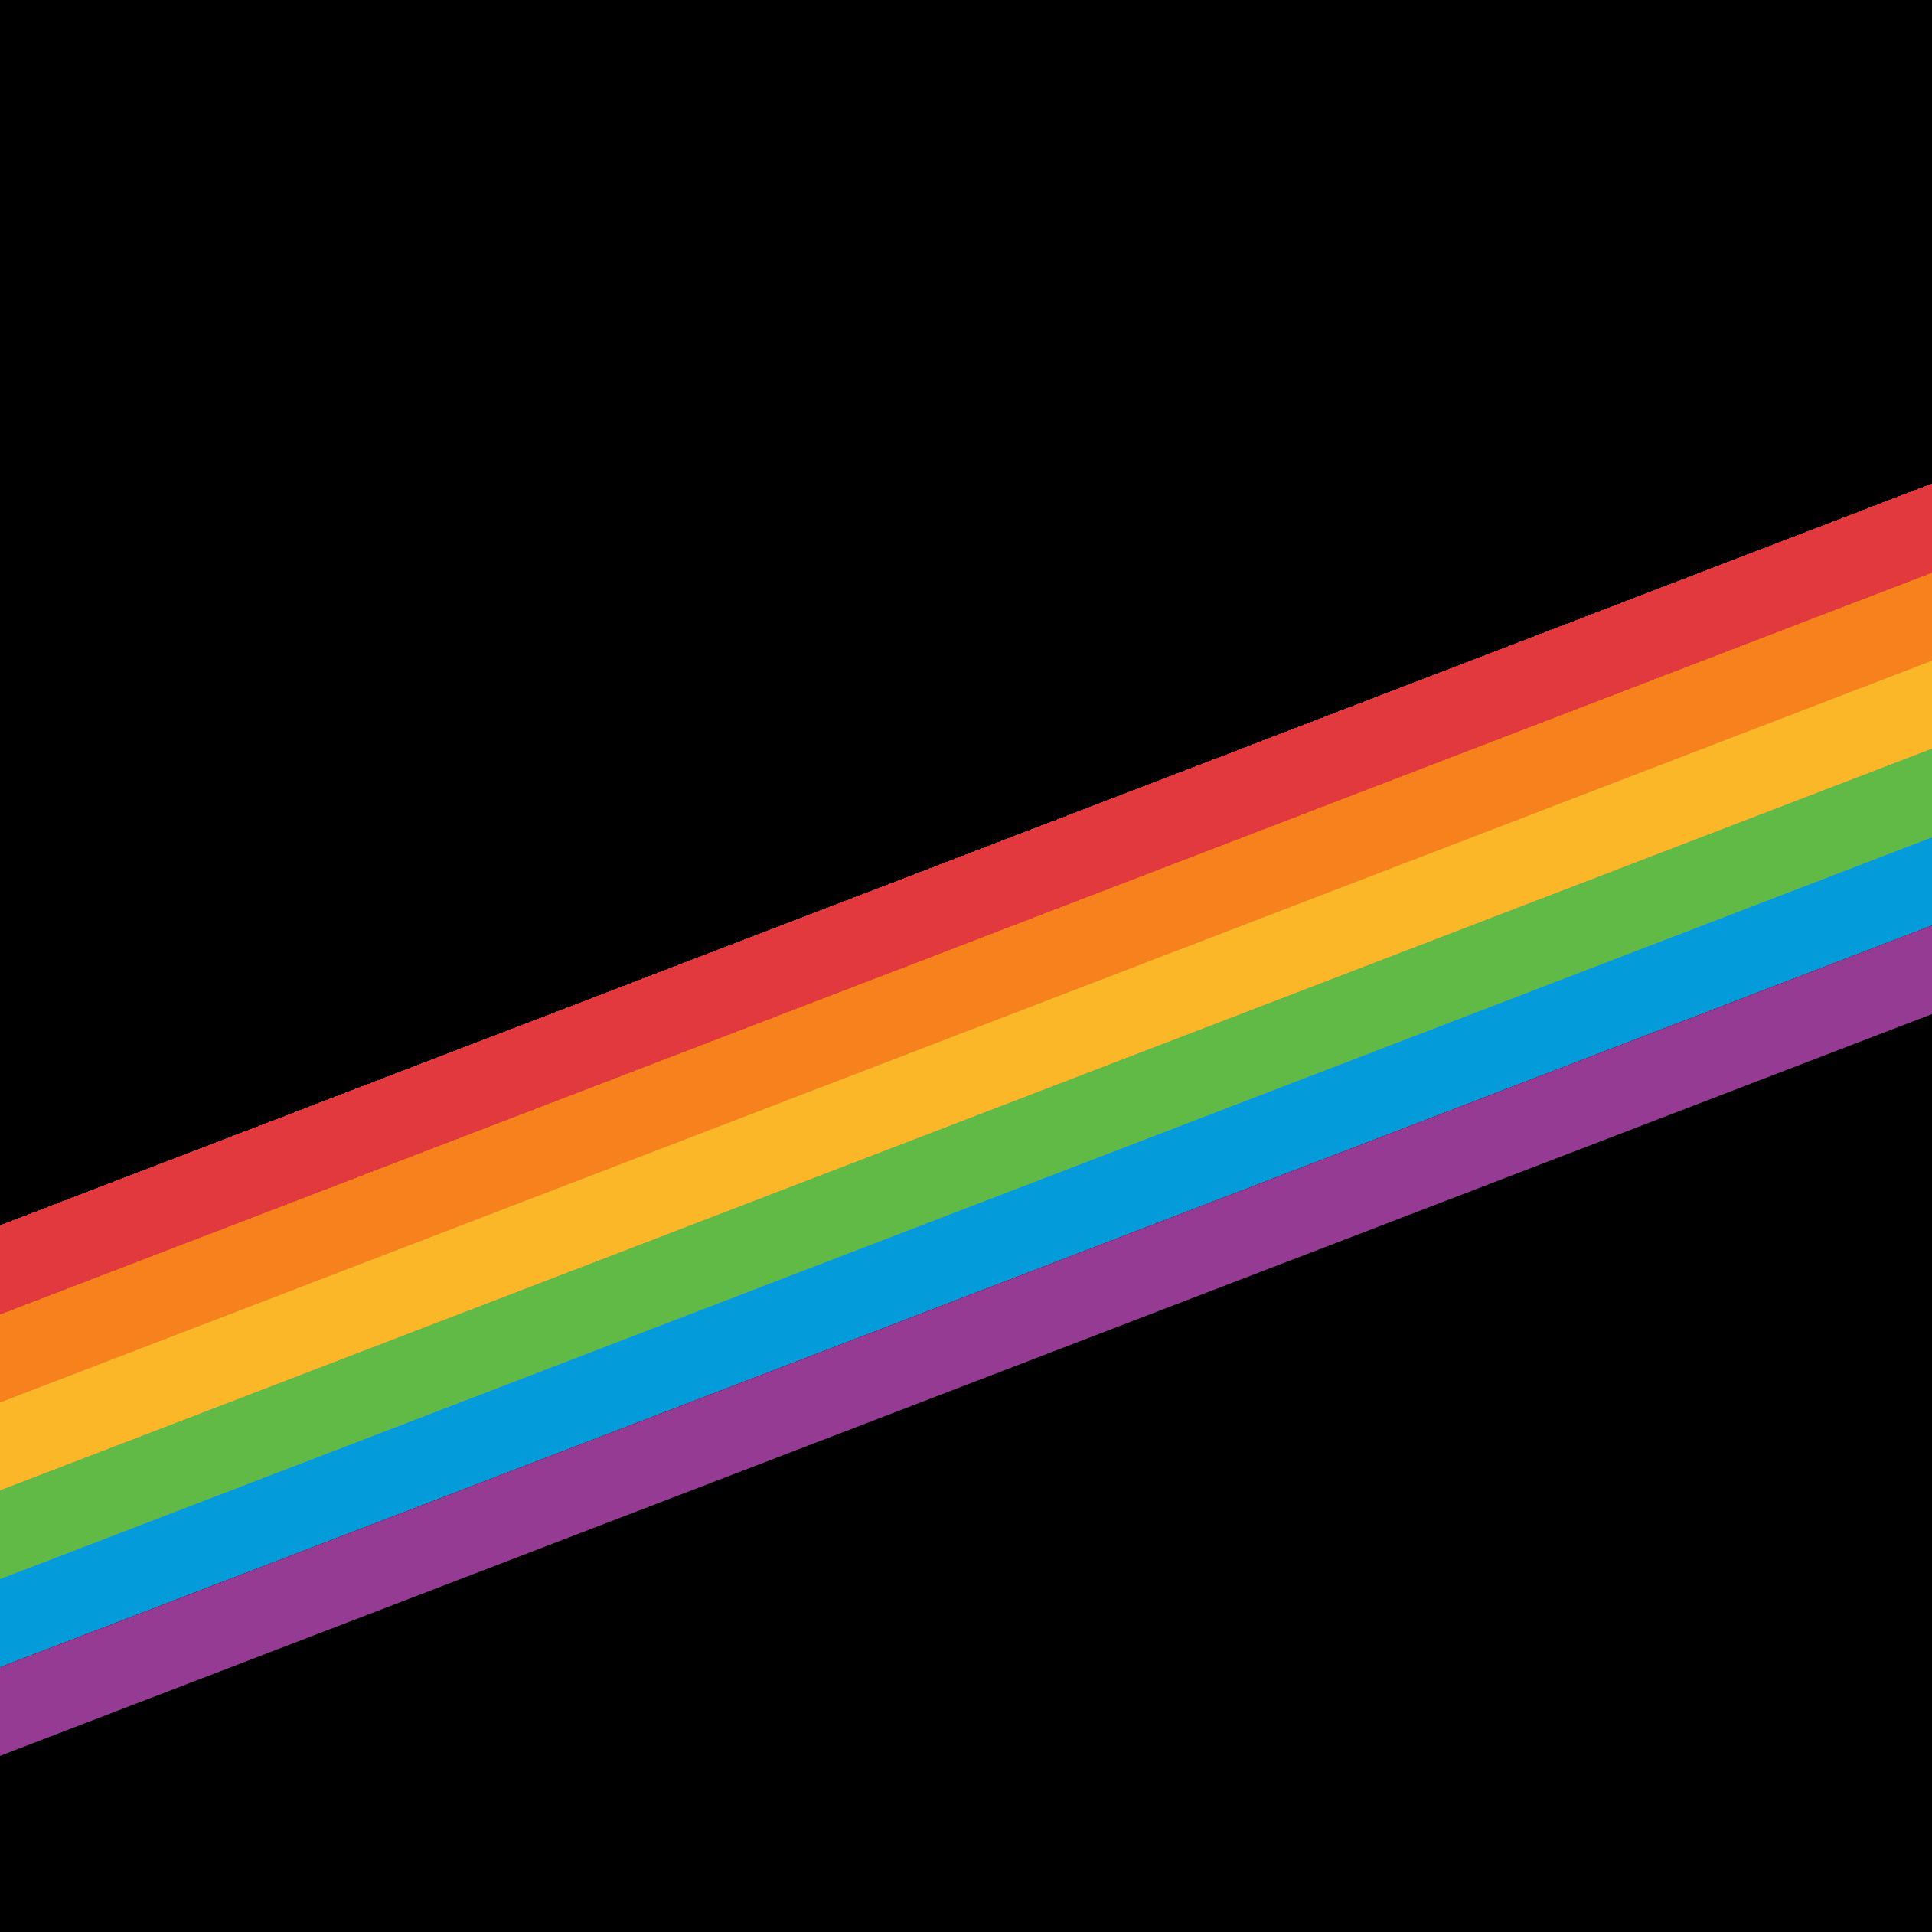 I Changed The Apple Retro Wallpaper To The Pride Flag Rainbow